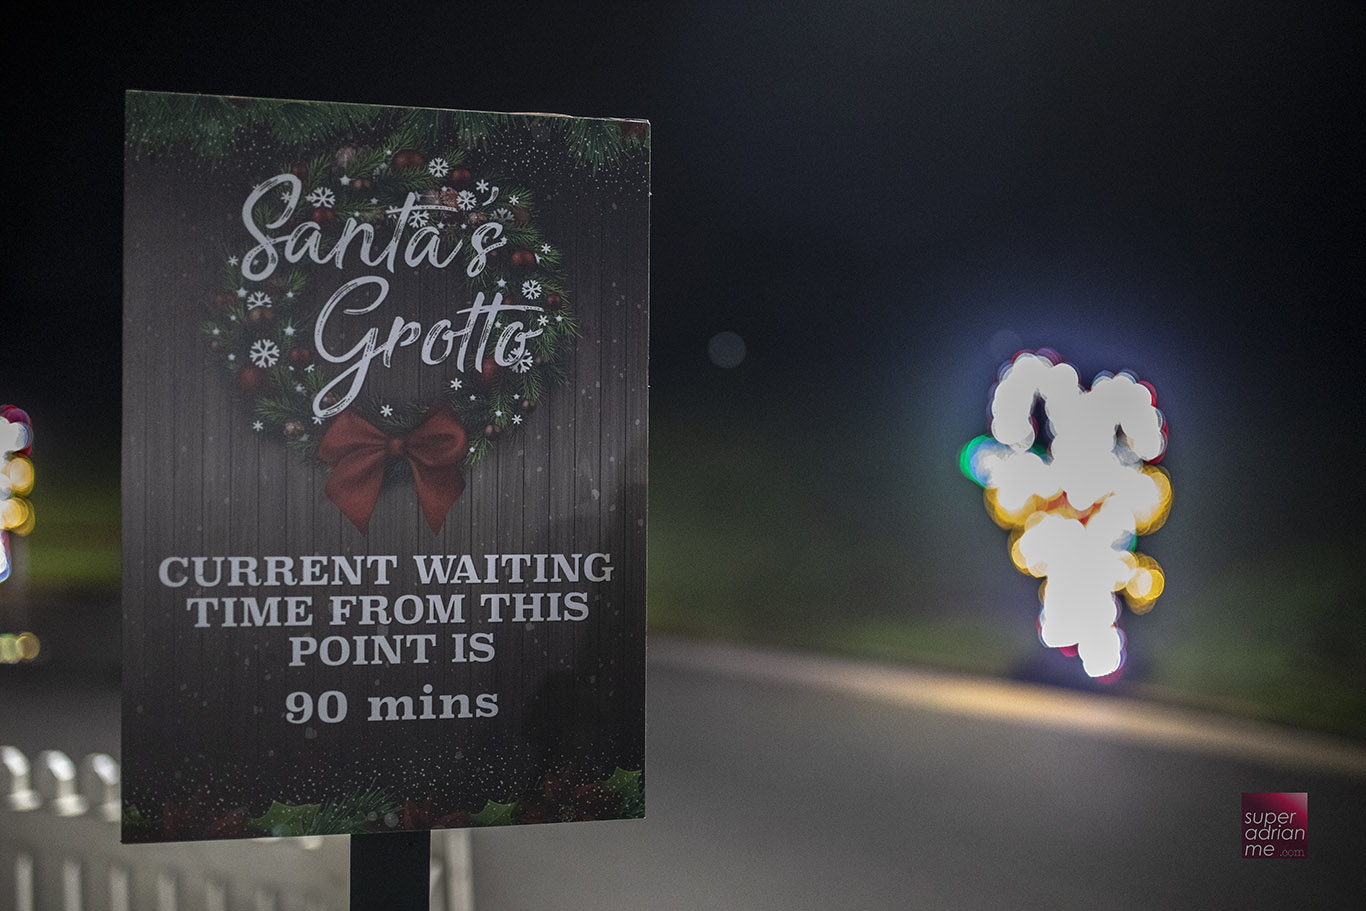 If you see this Queue poster for Santa's Grotto....